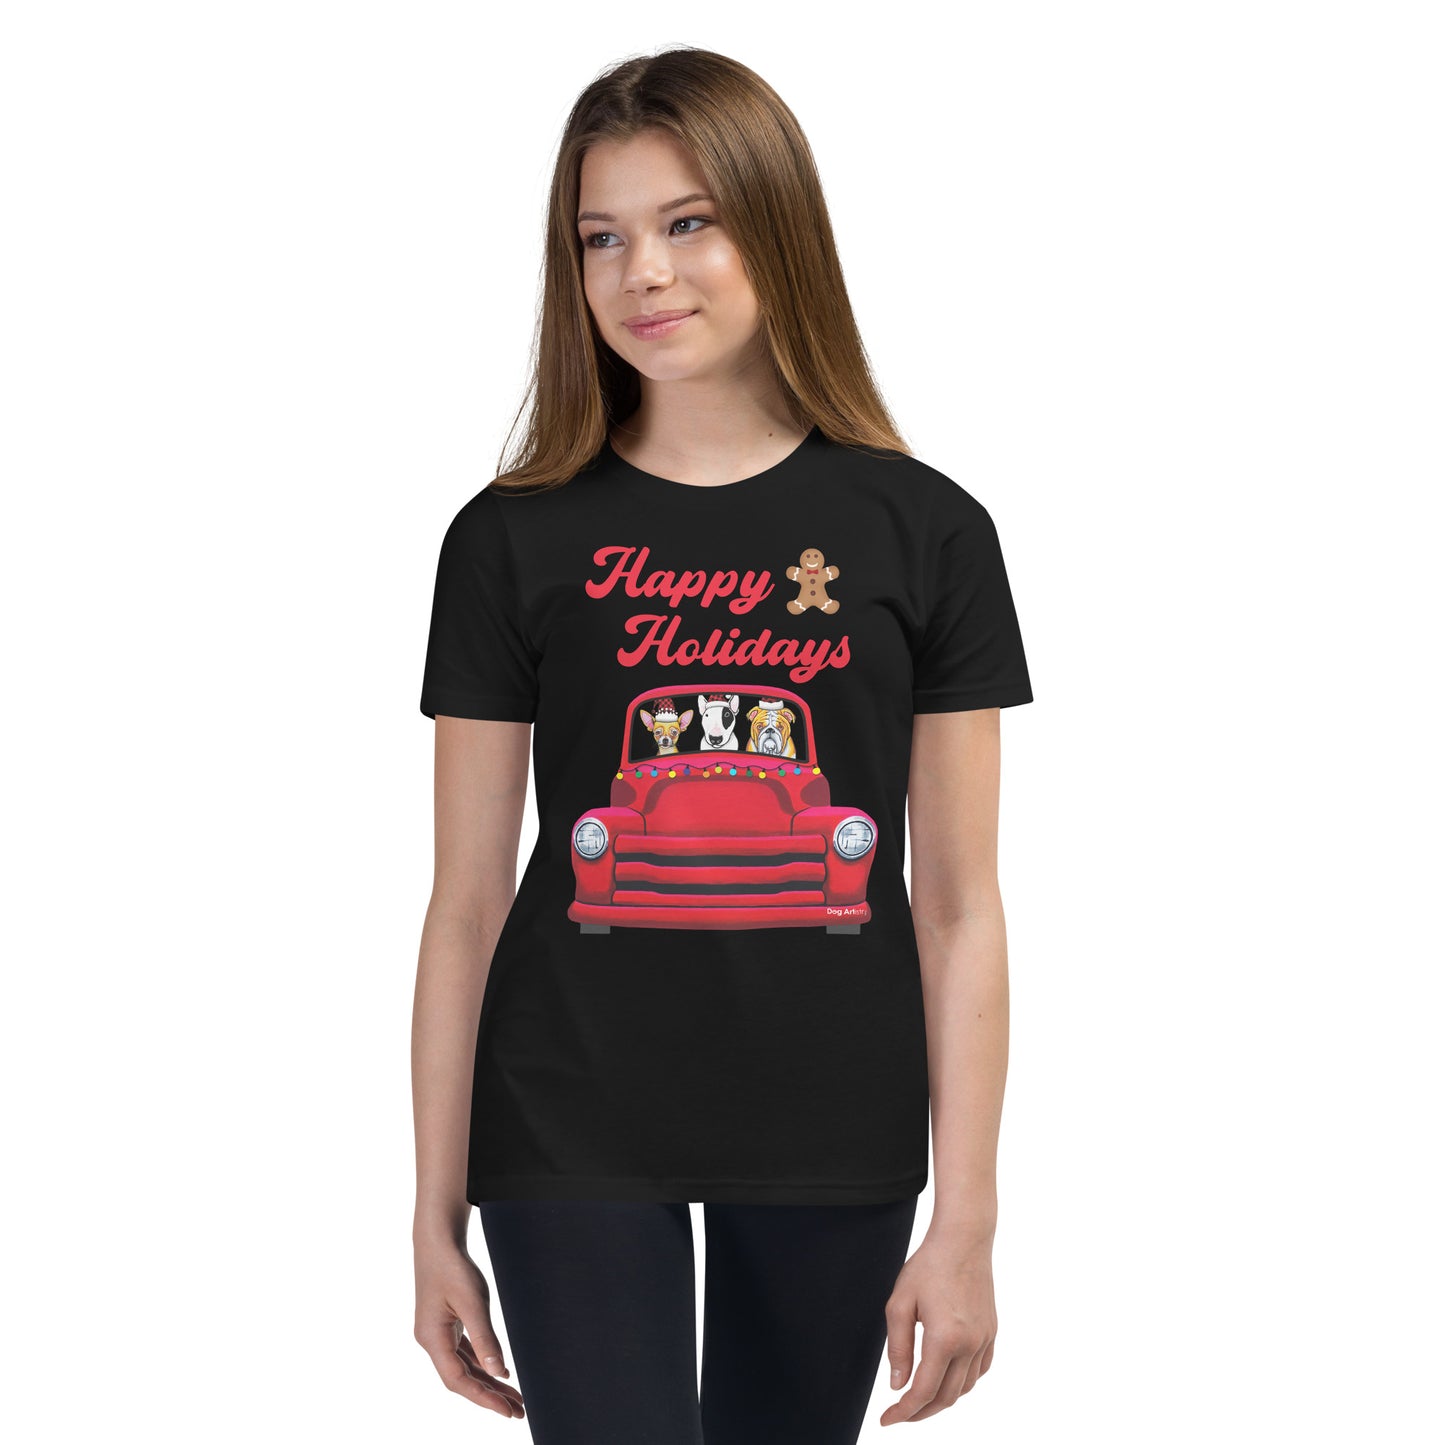 Red Holiday truck with Chihuahua, English Bull Terrier, and English Bulldog riding in it youth t-shirt black by Dog Artistry